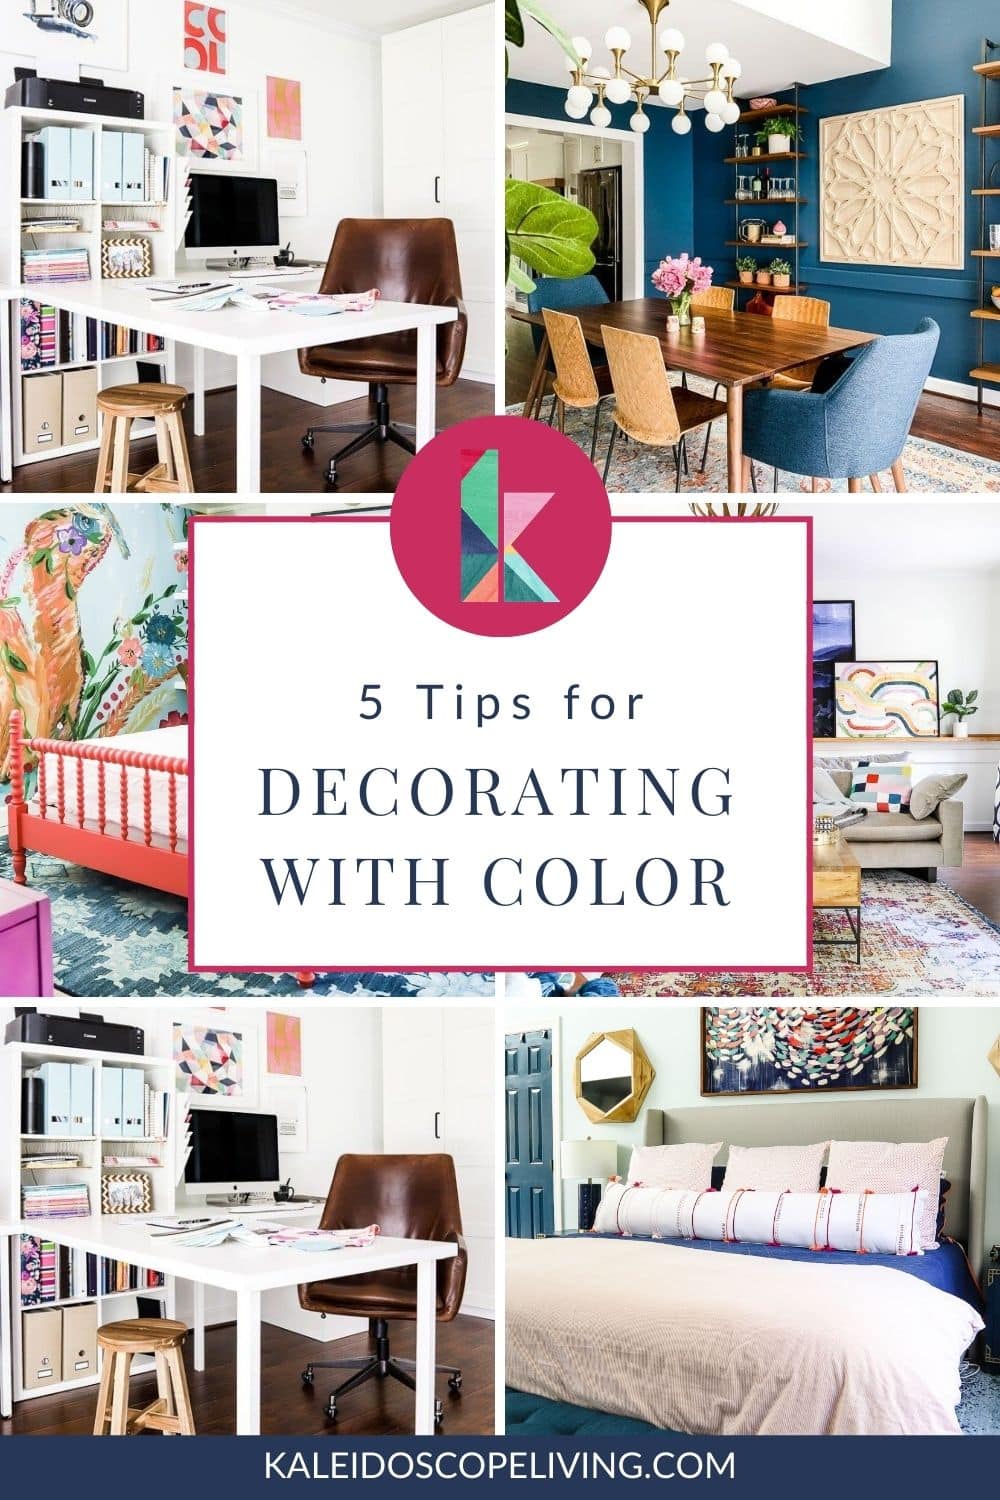 5 Tips for Decorating With Color Even When It Scares You